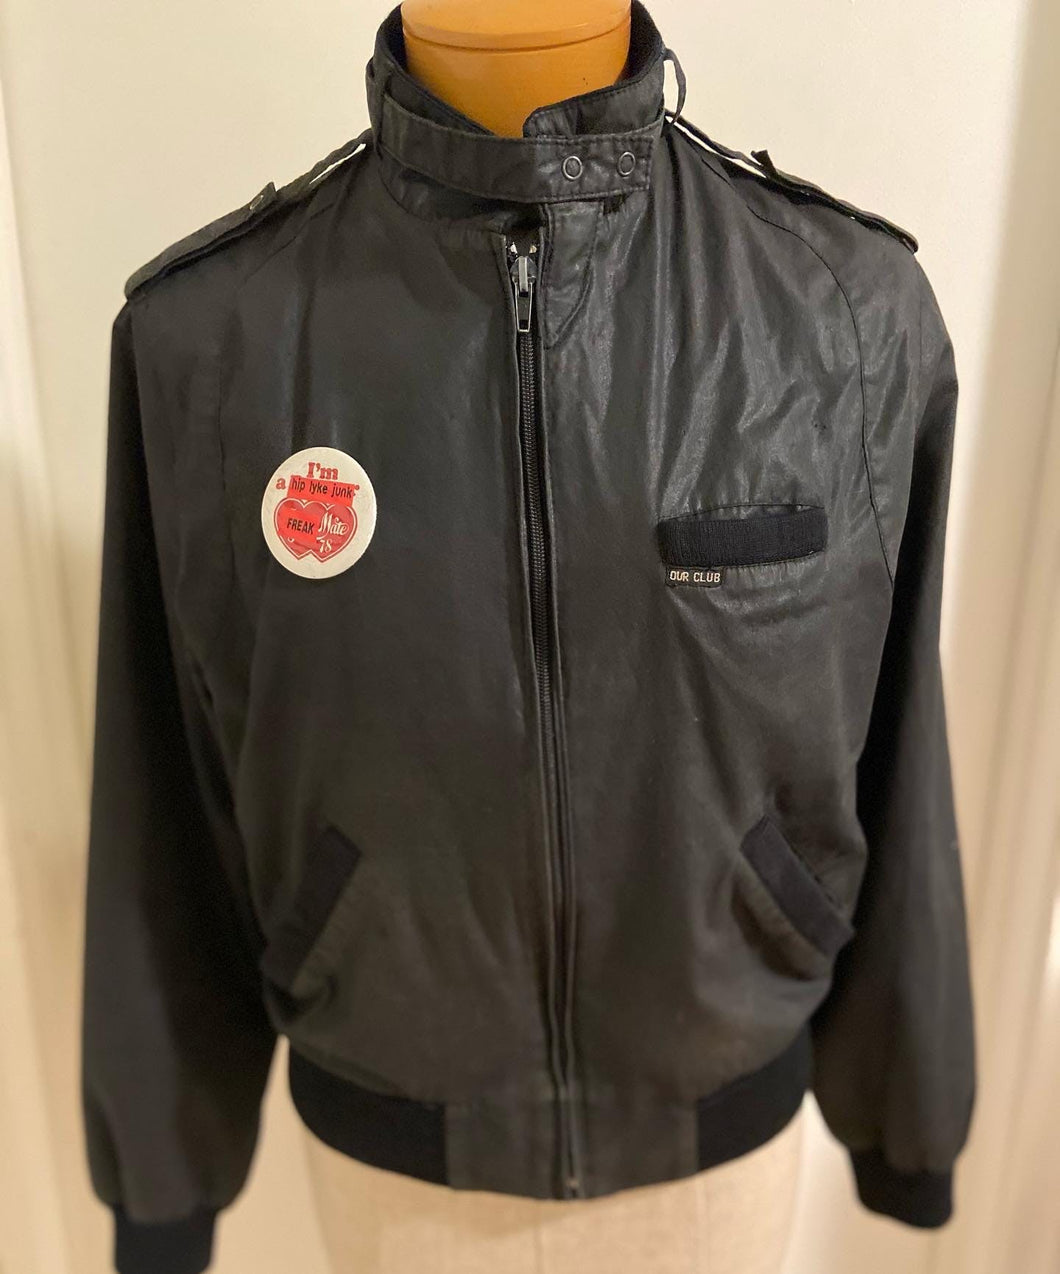 80s 80s Father's Day Black Member's Only Style Jacket By Our Gang